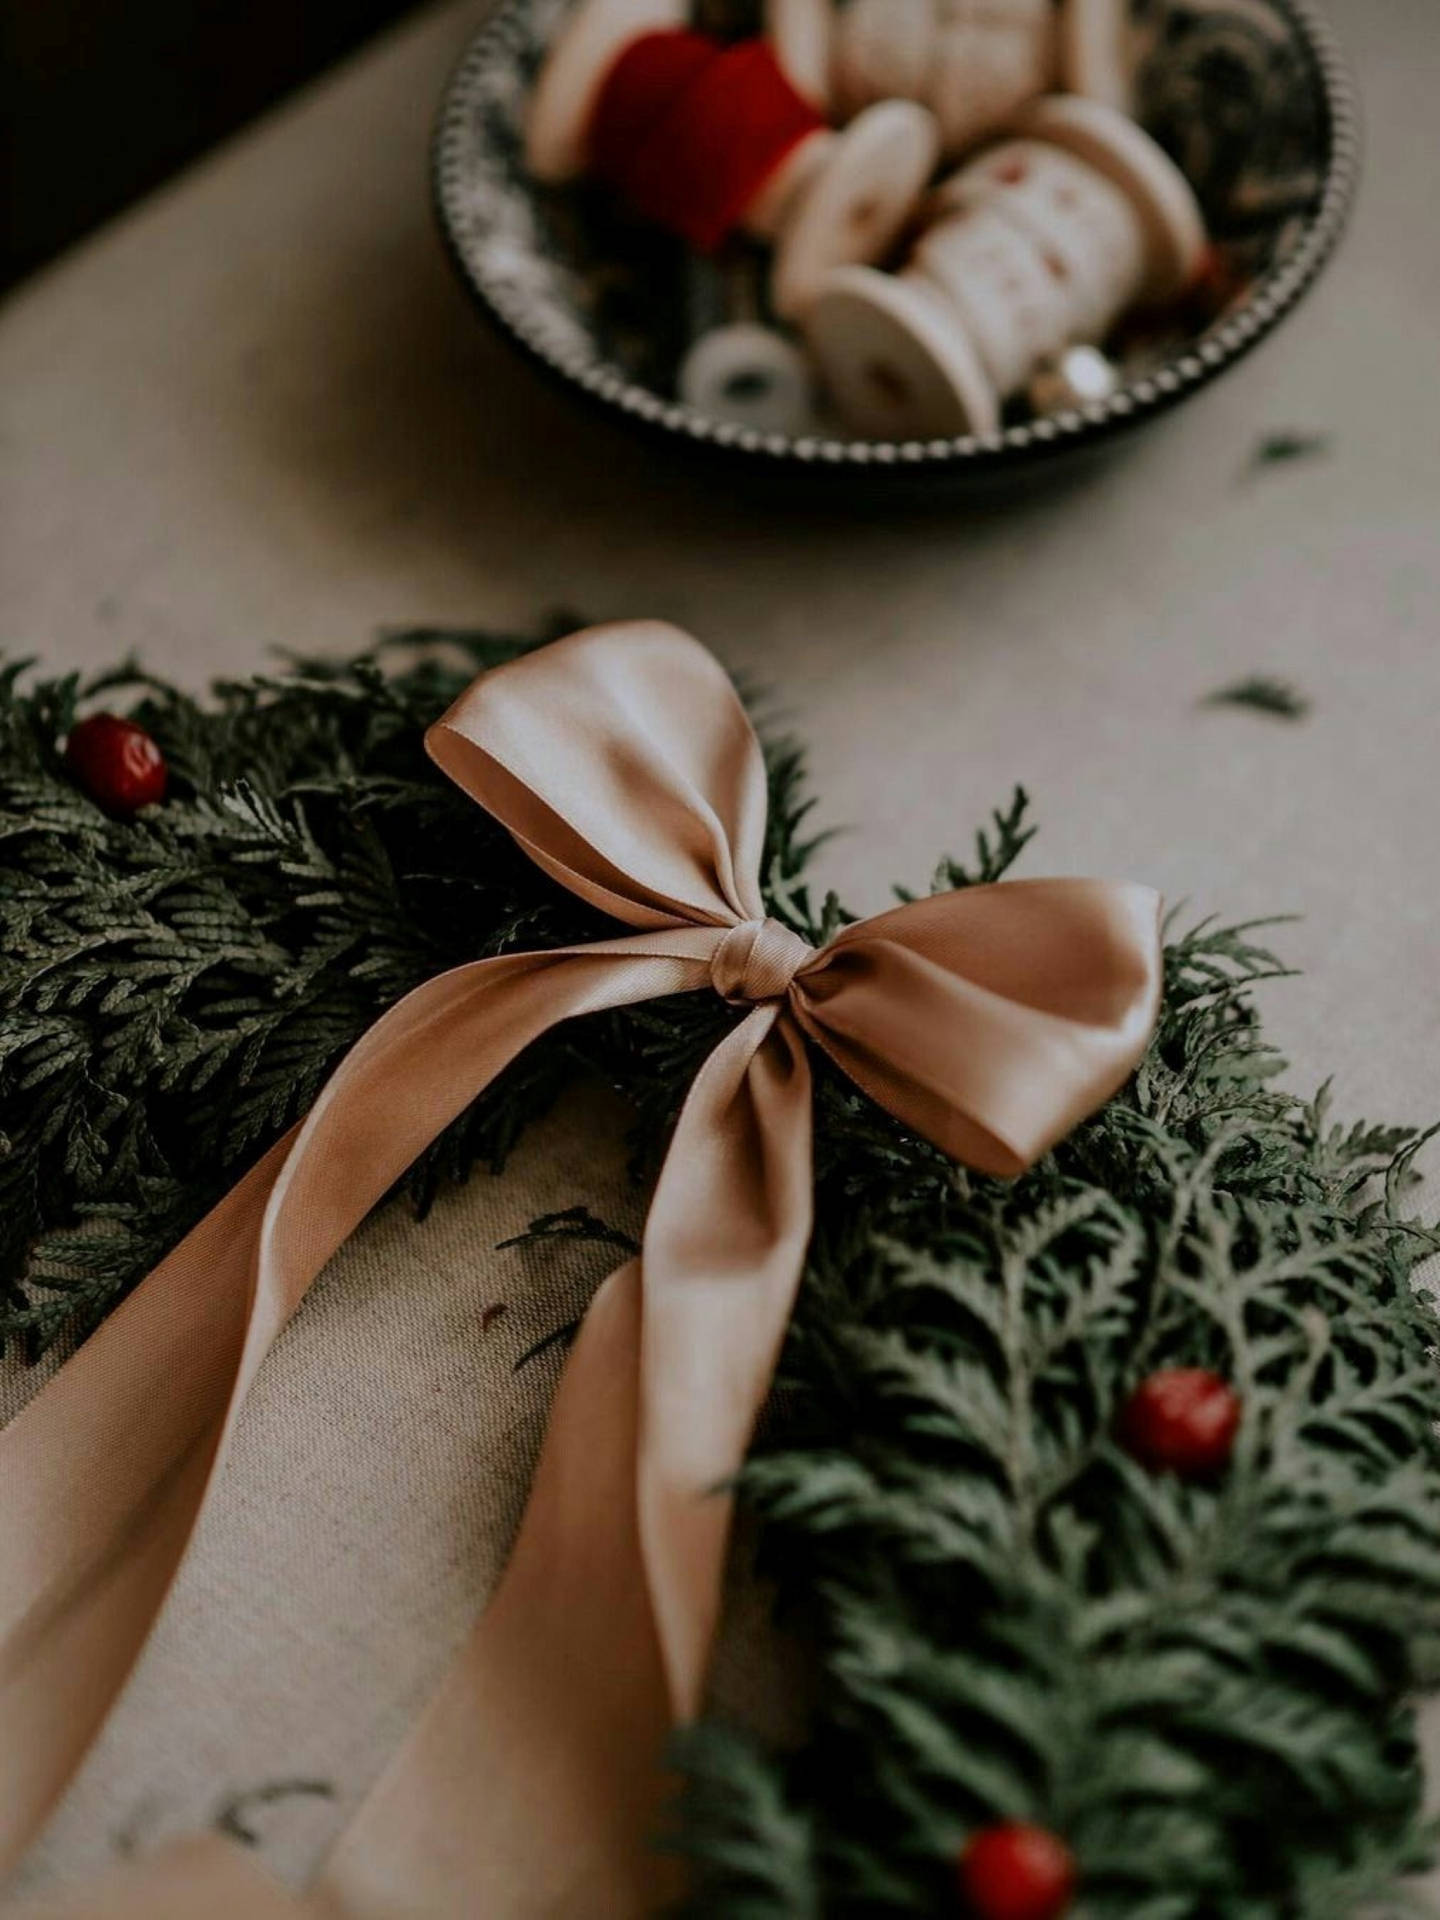 Festive Serenity: A Christmas Aesthetic Wreath Adorned With A Ribbon Background